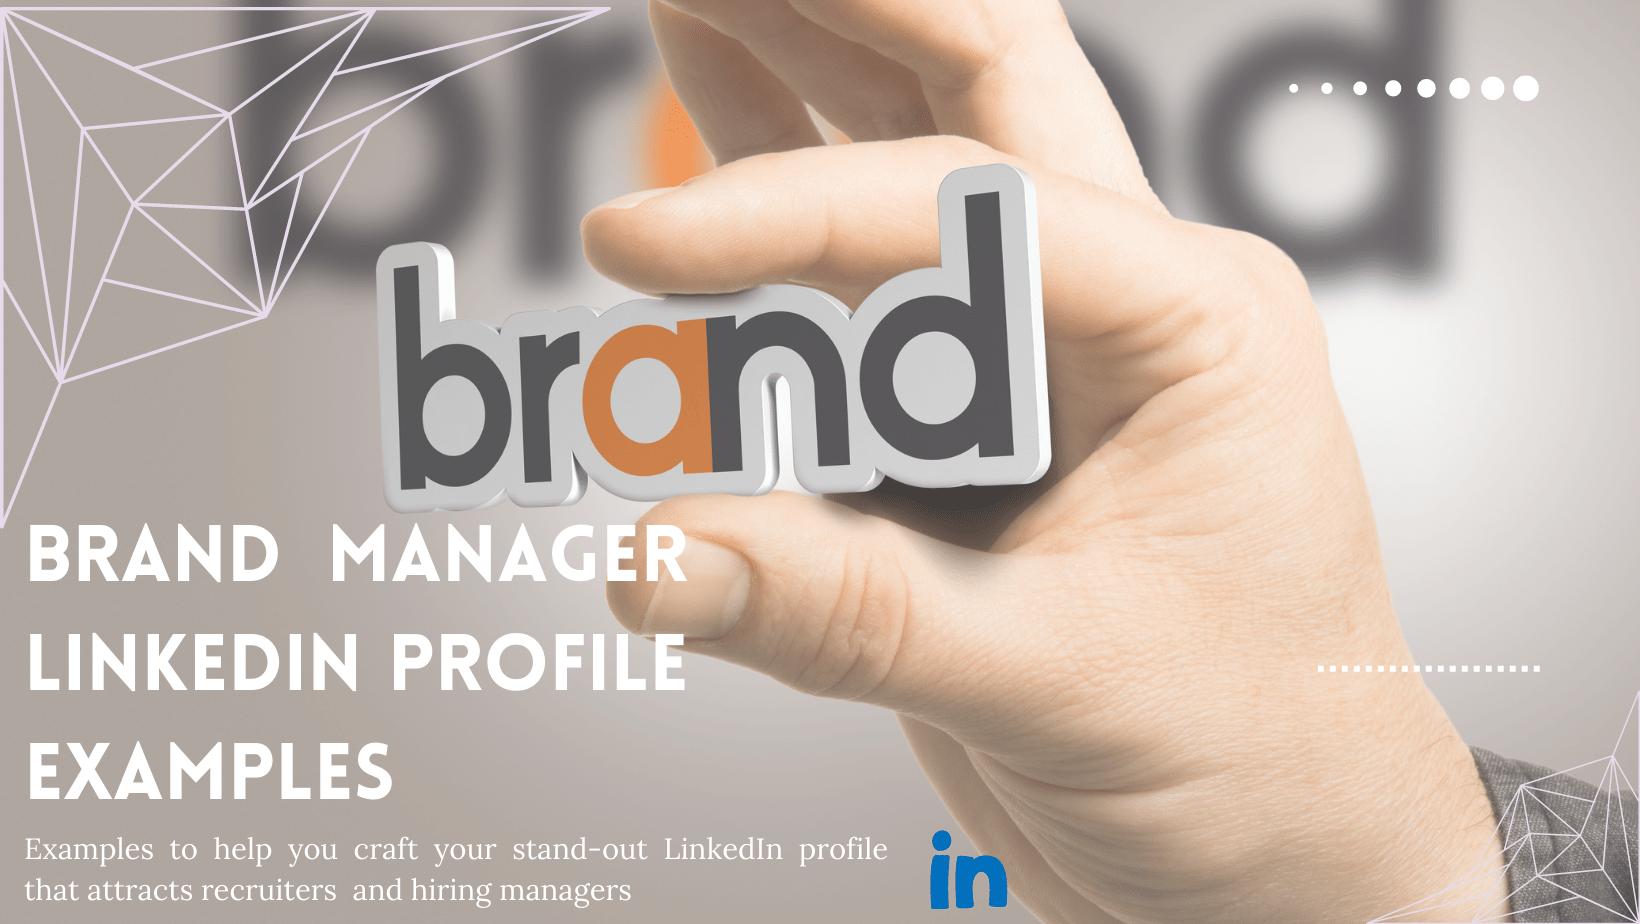 Brand Manager LinkedIn Profile Examples